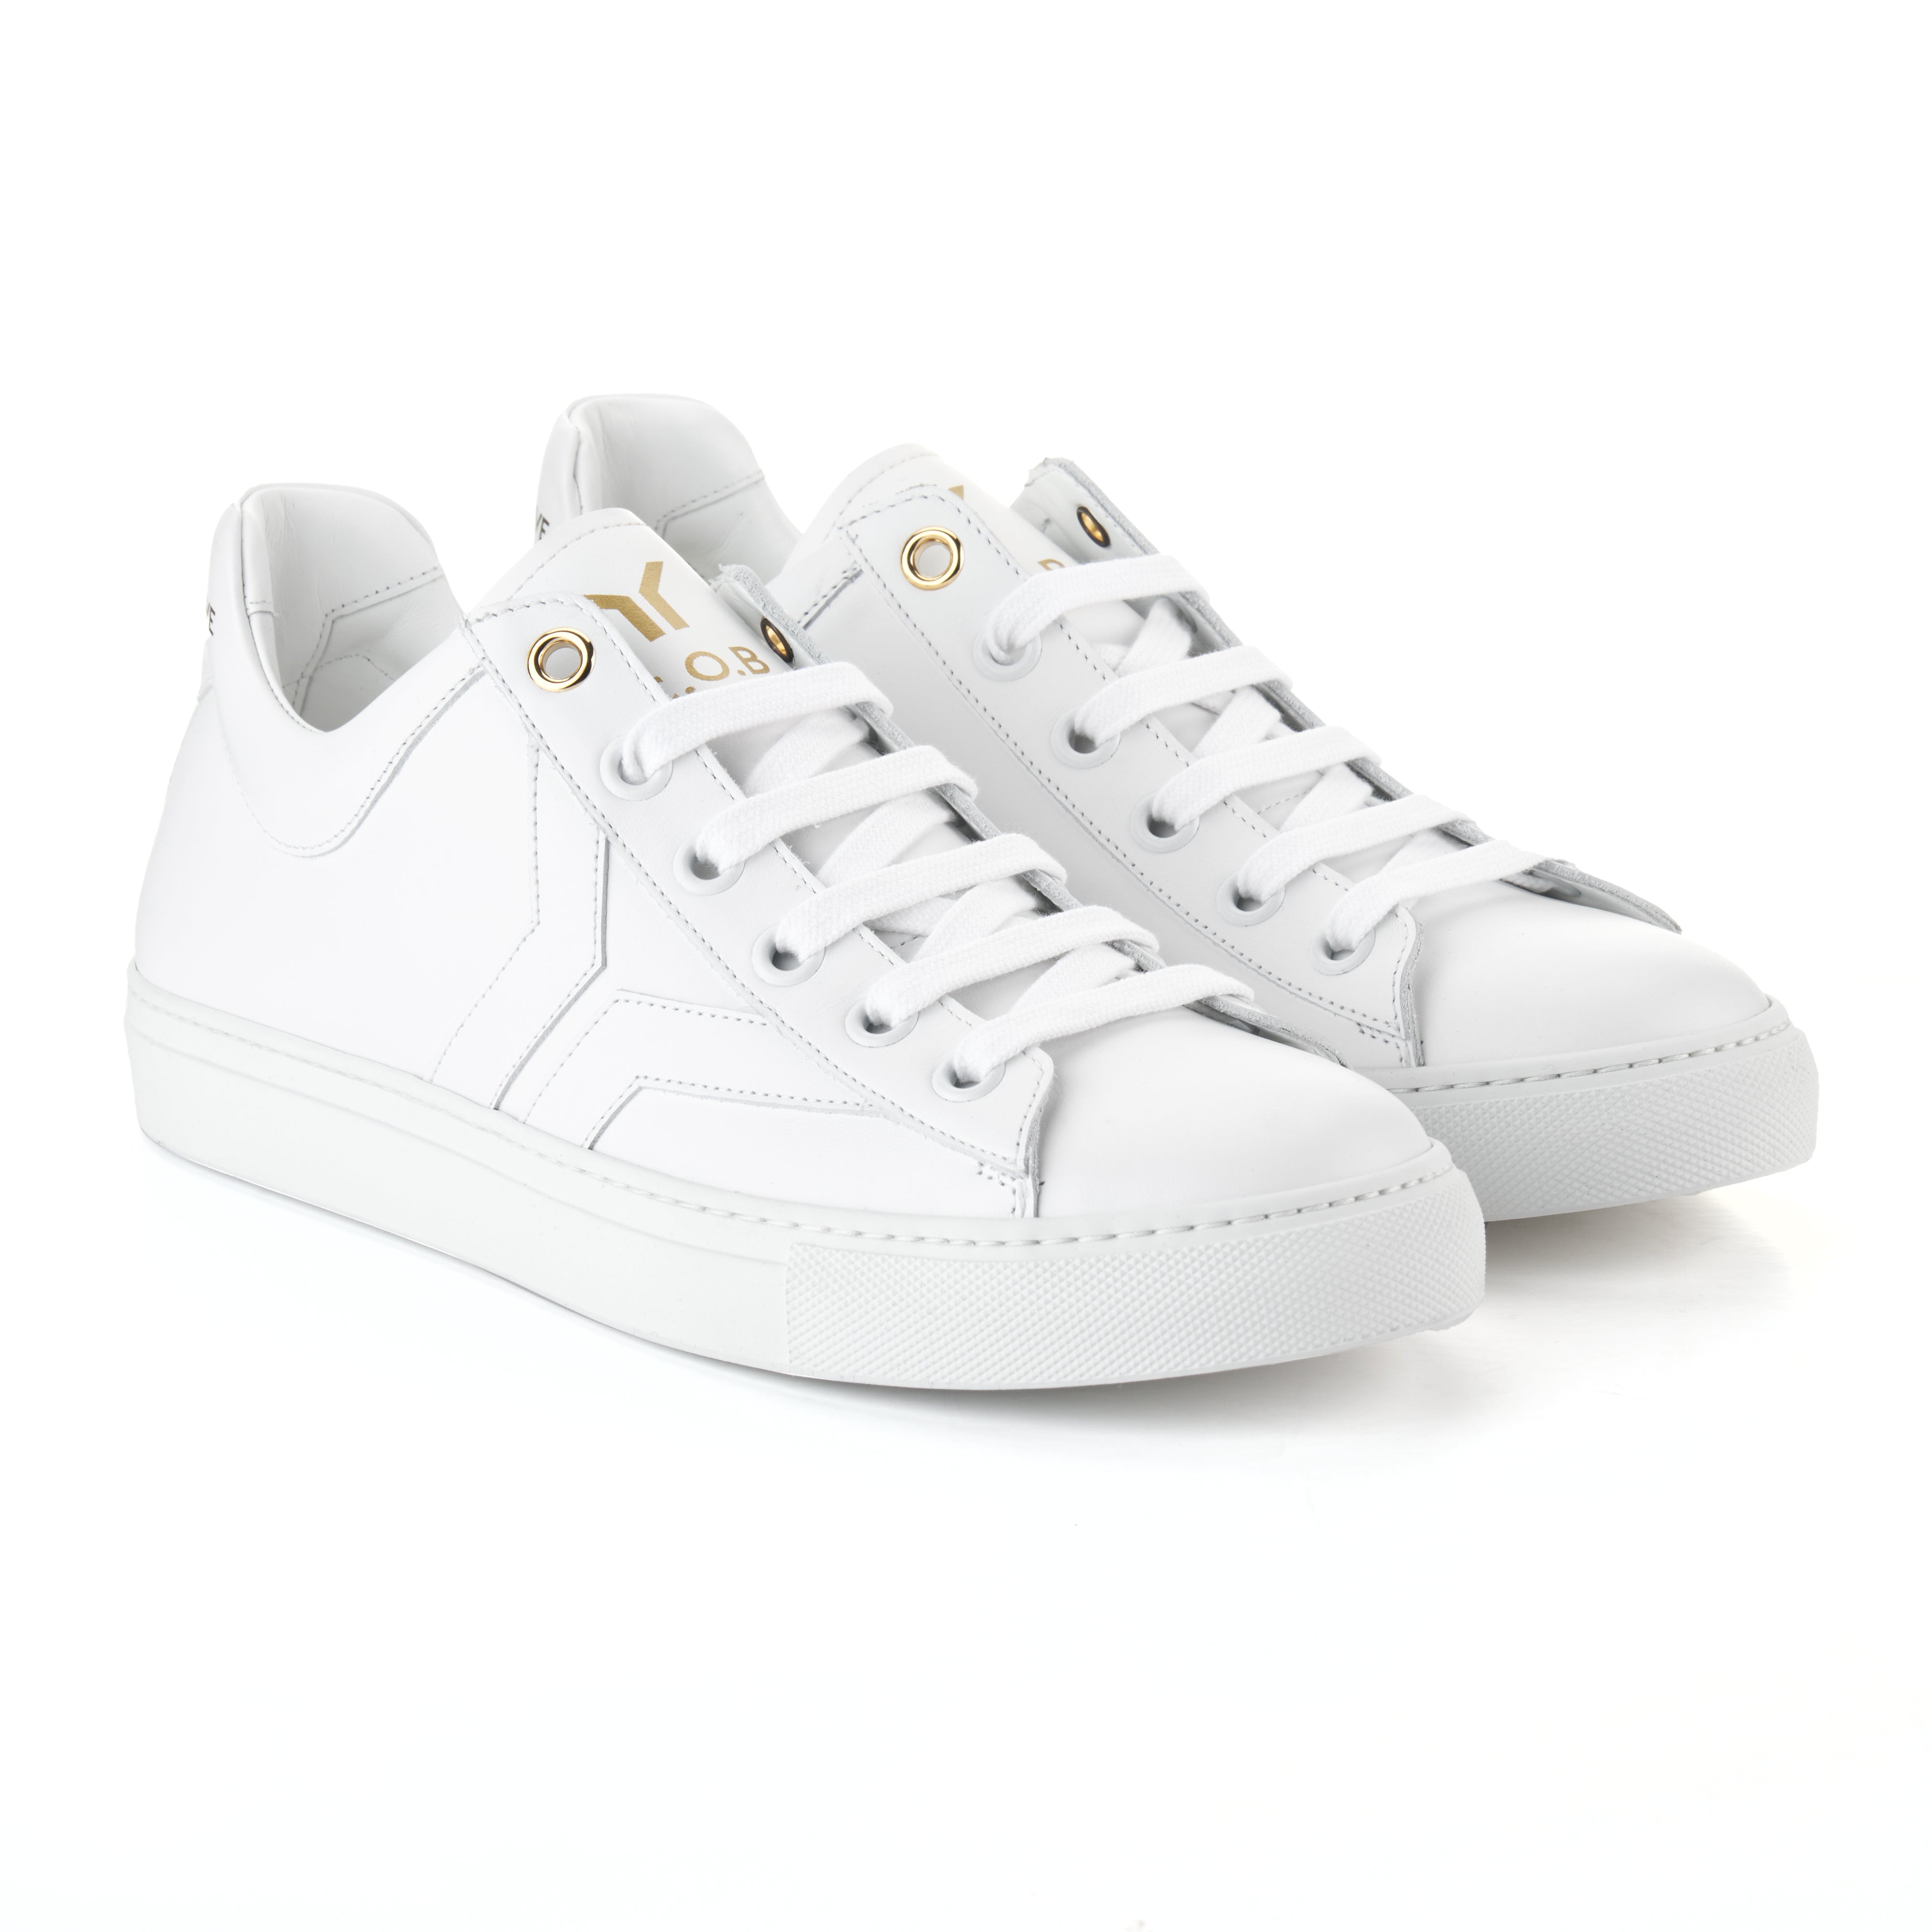 Courage S1 Women White leather white wing low cut